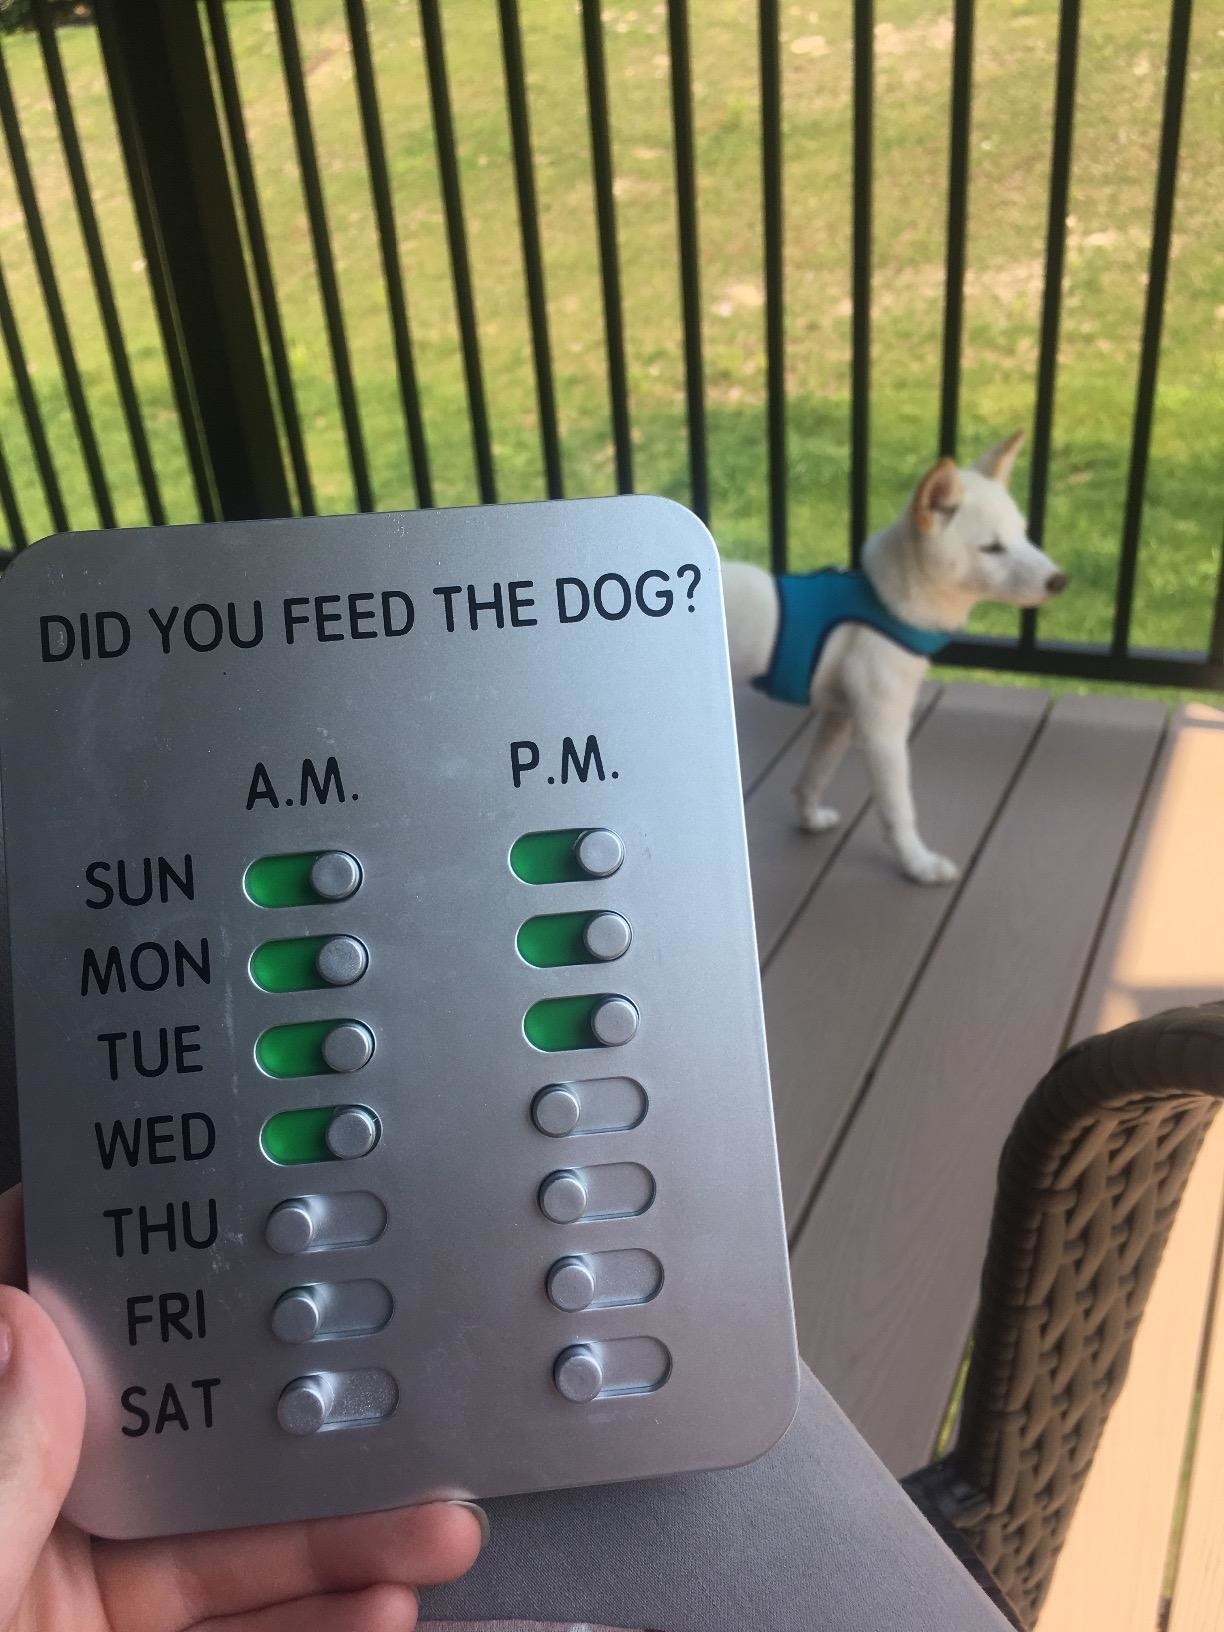 The sign, which has sliders for the a.m. and p.m. that you turn to green when you&#x27;ve fed the dog